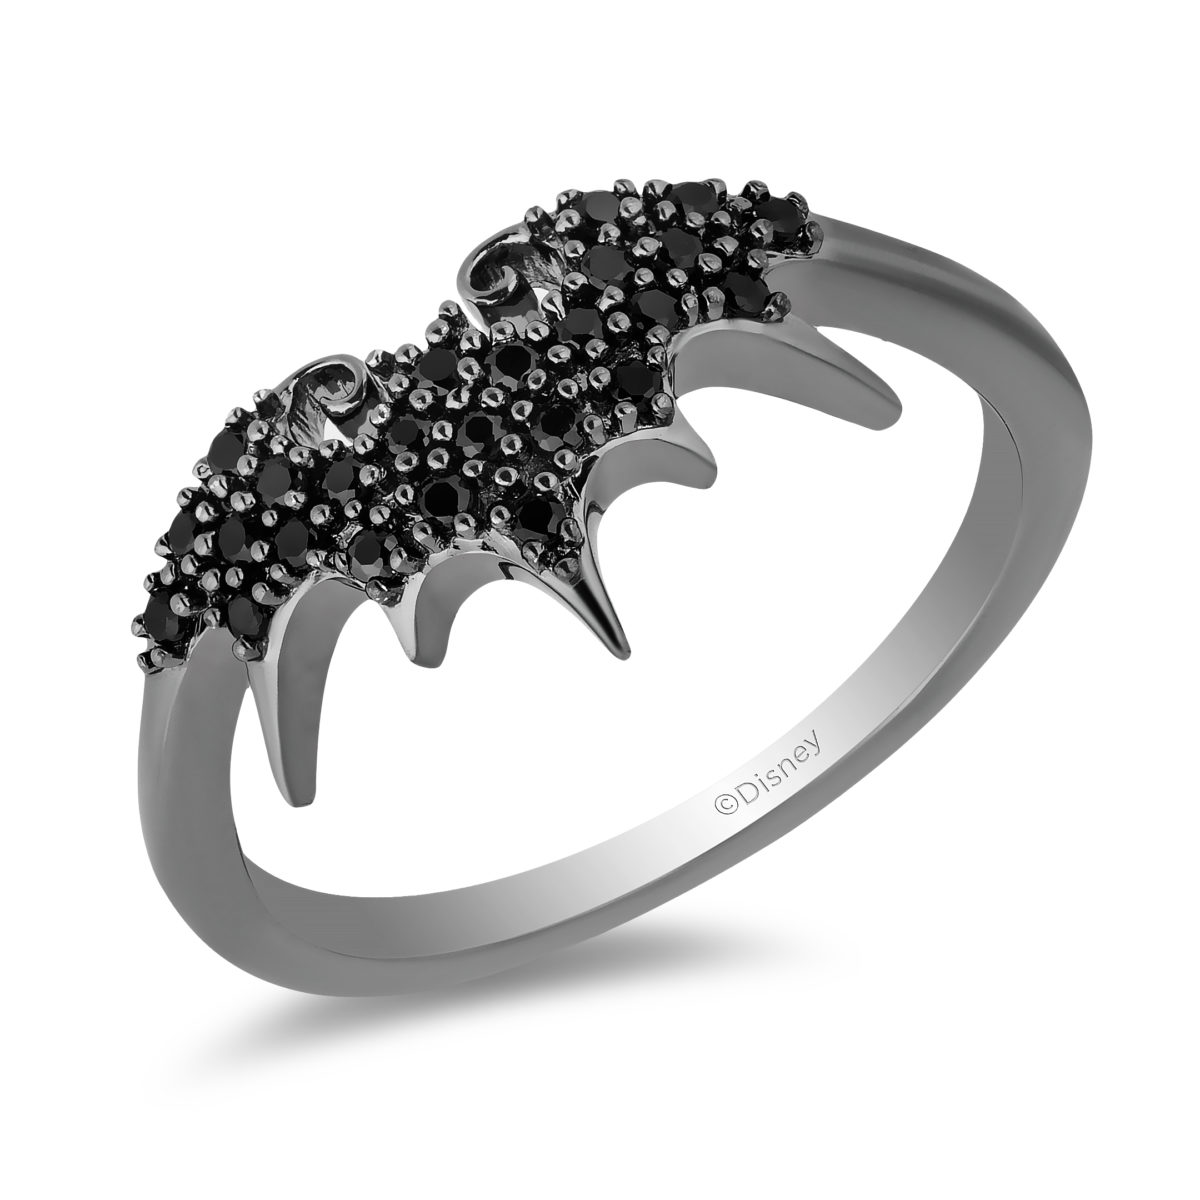 SHOP New "The Nightmare Before Christmas" Collection from Kay Jewelers